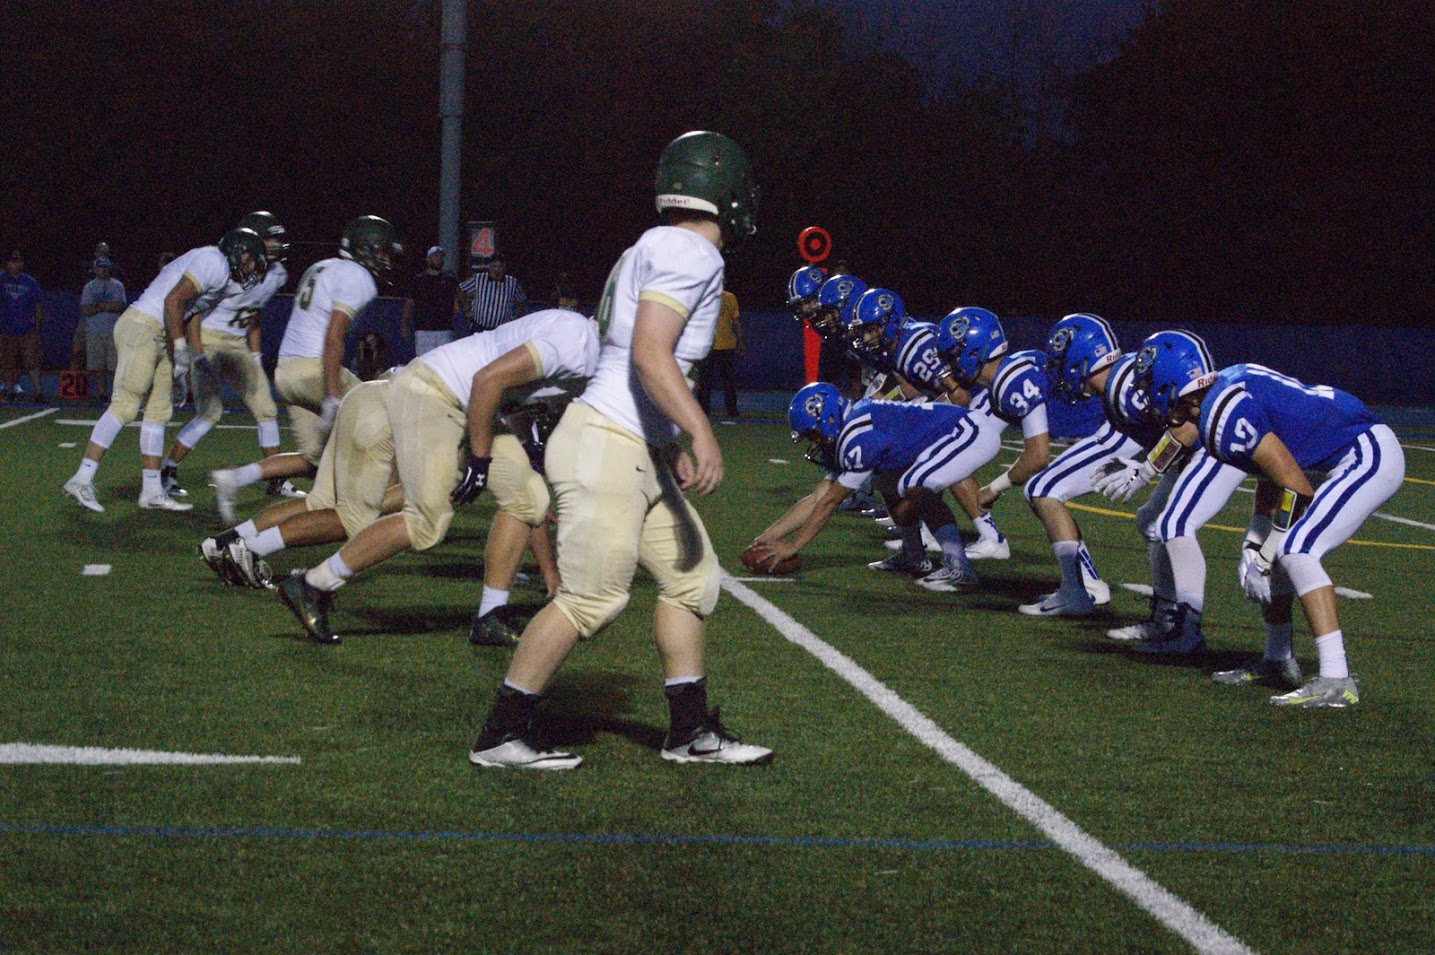 Football players line up for the next play during a game on August 26, prior to the hazing allegations. New head coach Luke Mertens is bringing a brand new coaching philosophy which he believes will bounce the program back.